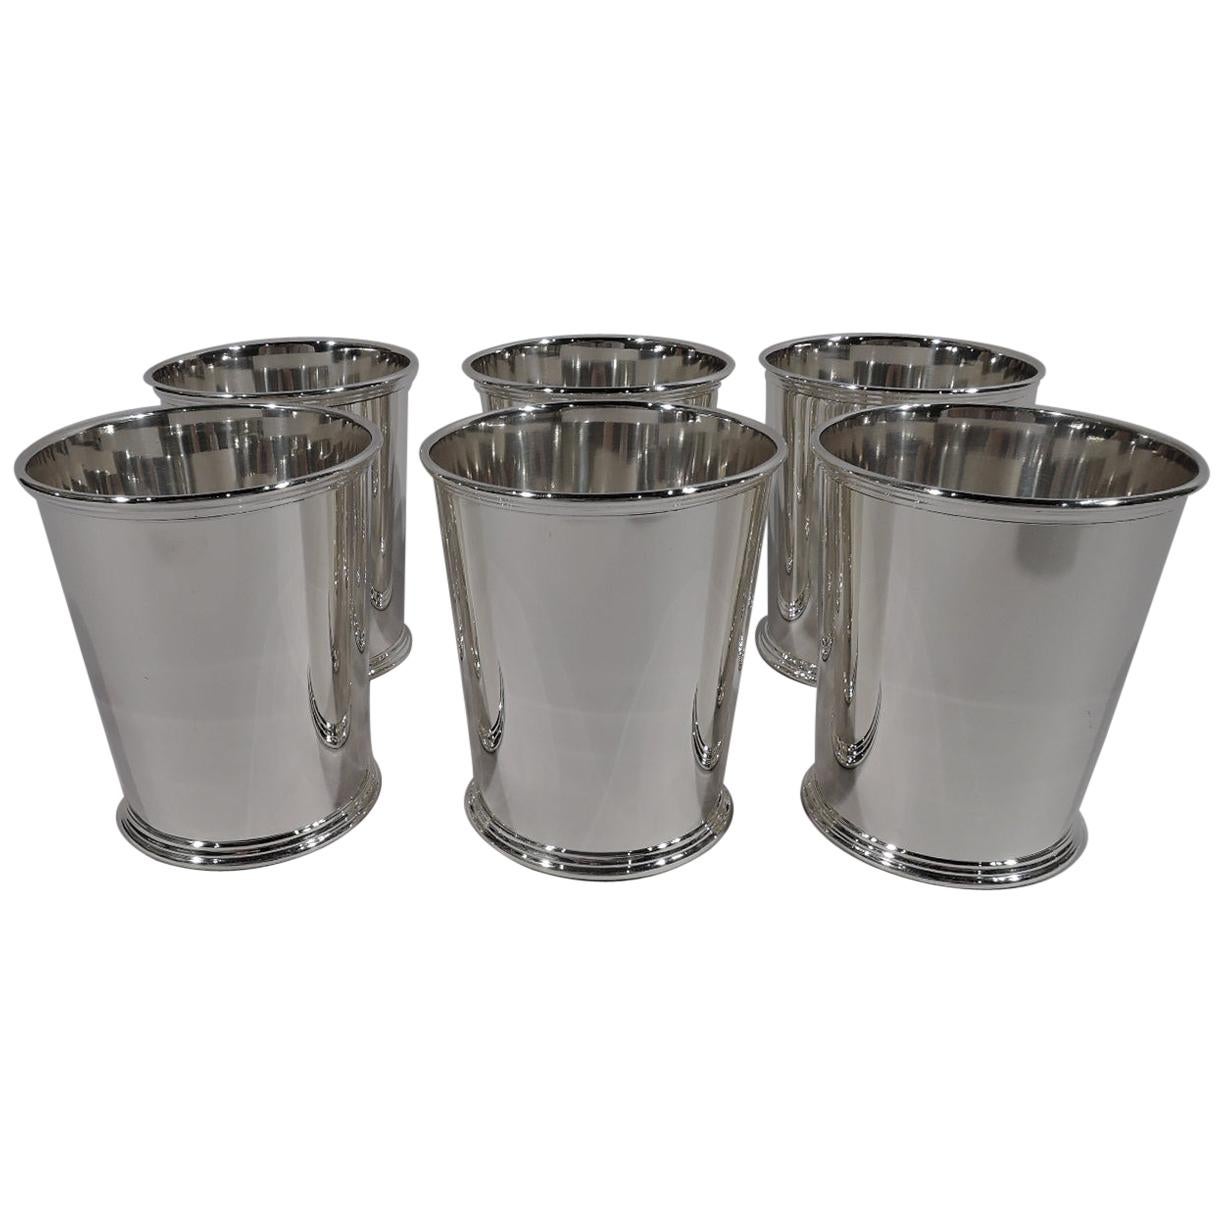 Set of 6 Sterling Silver Mint Julep Cups by Kirk of Baltimore